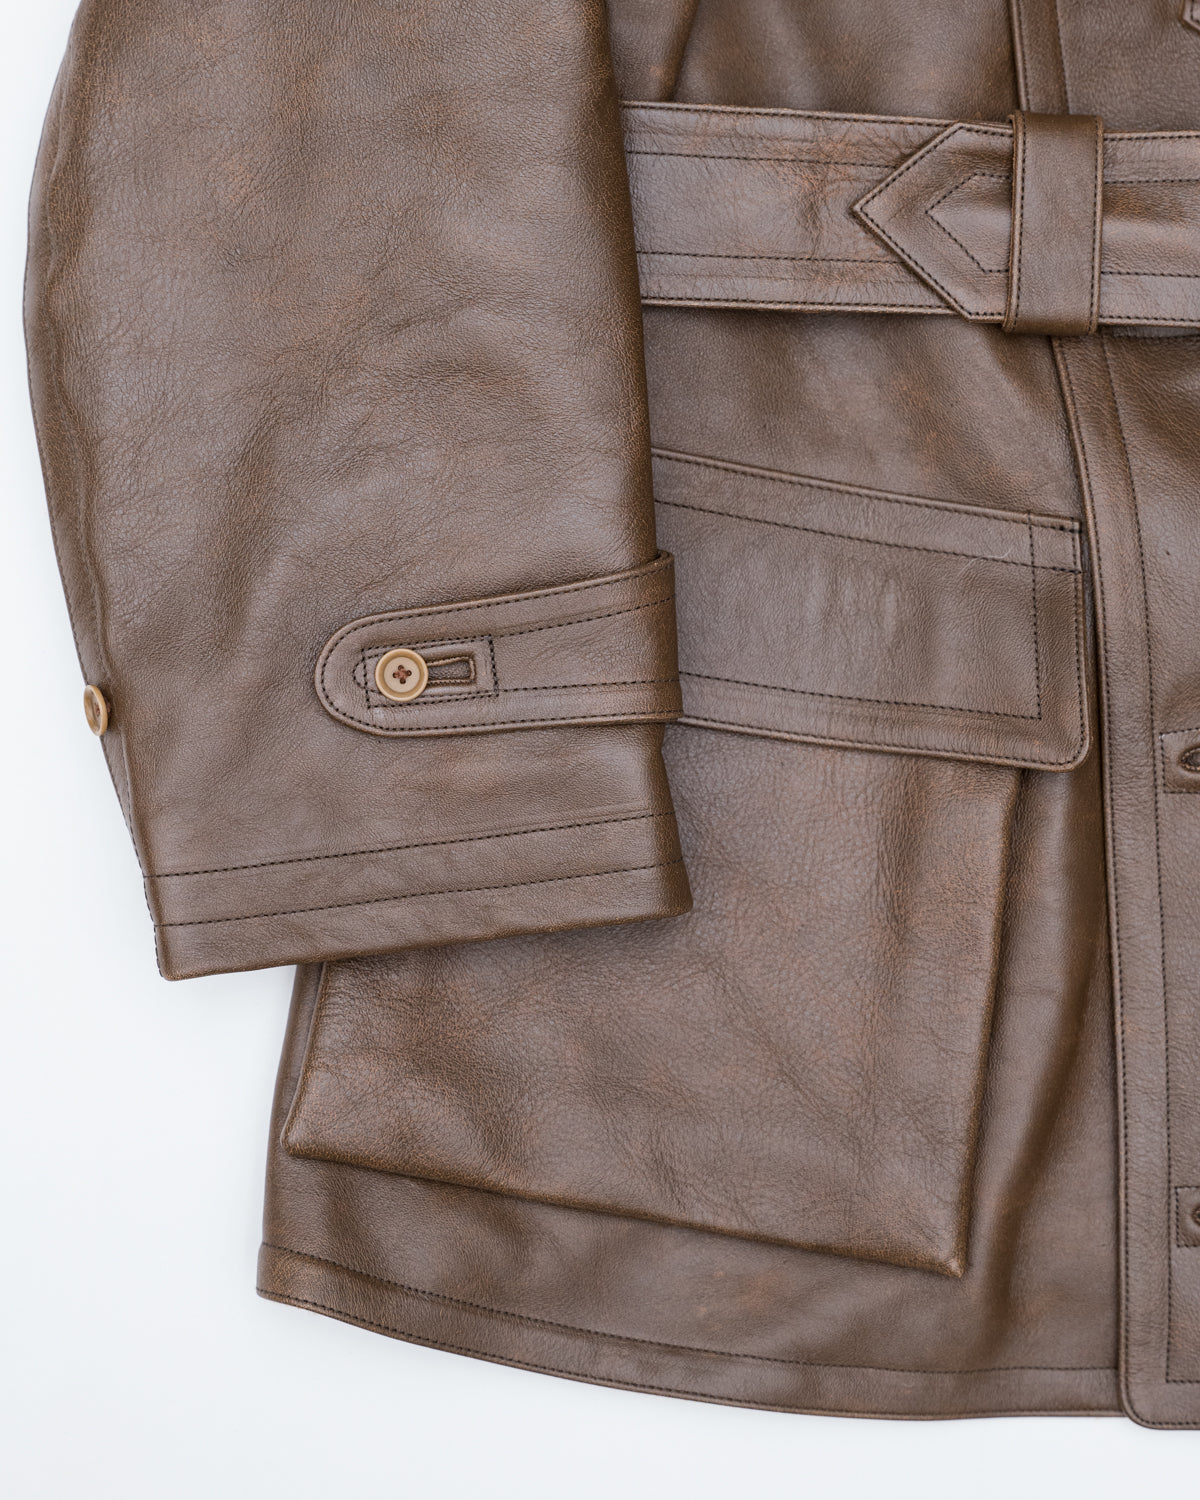 Lot 2184 - Horse Leather Aviator Jacket - Brown